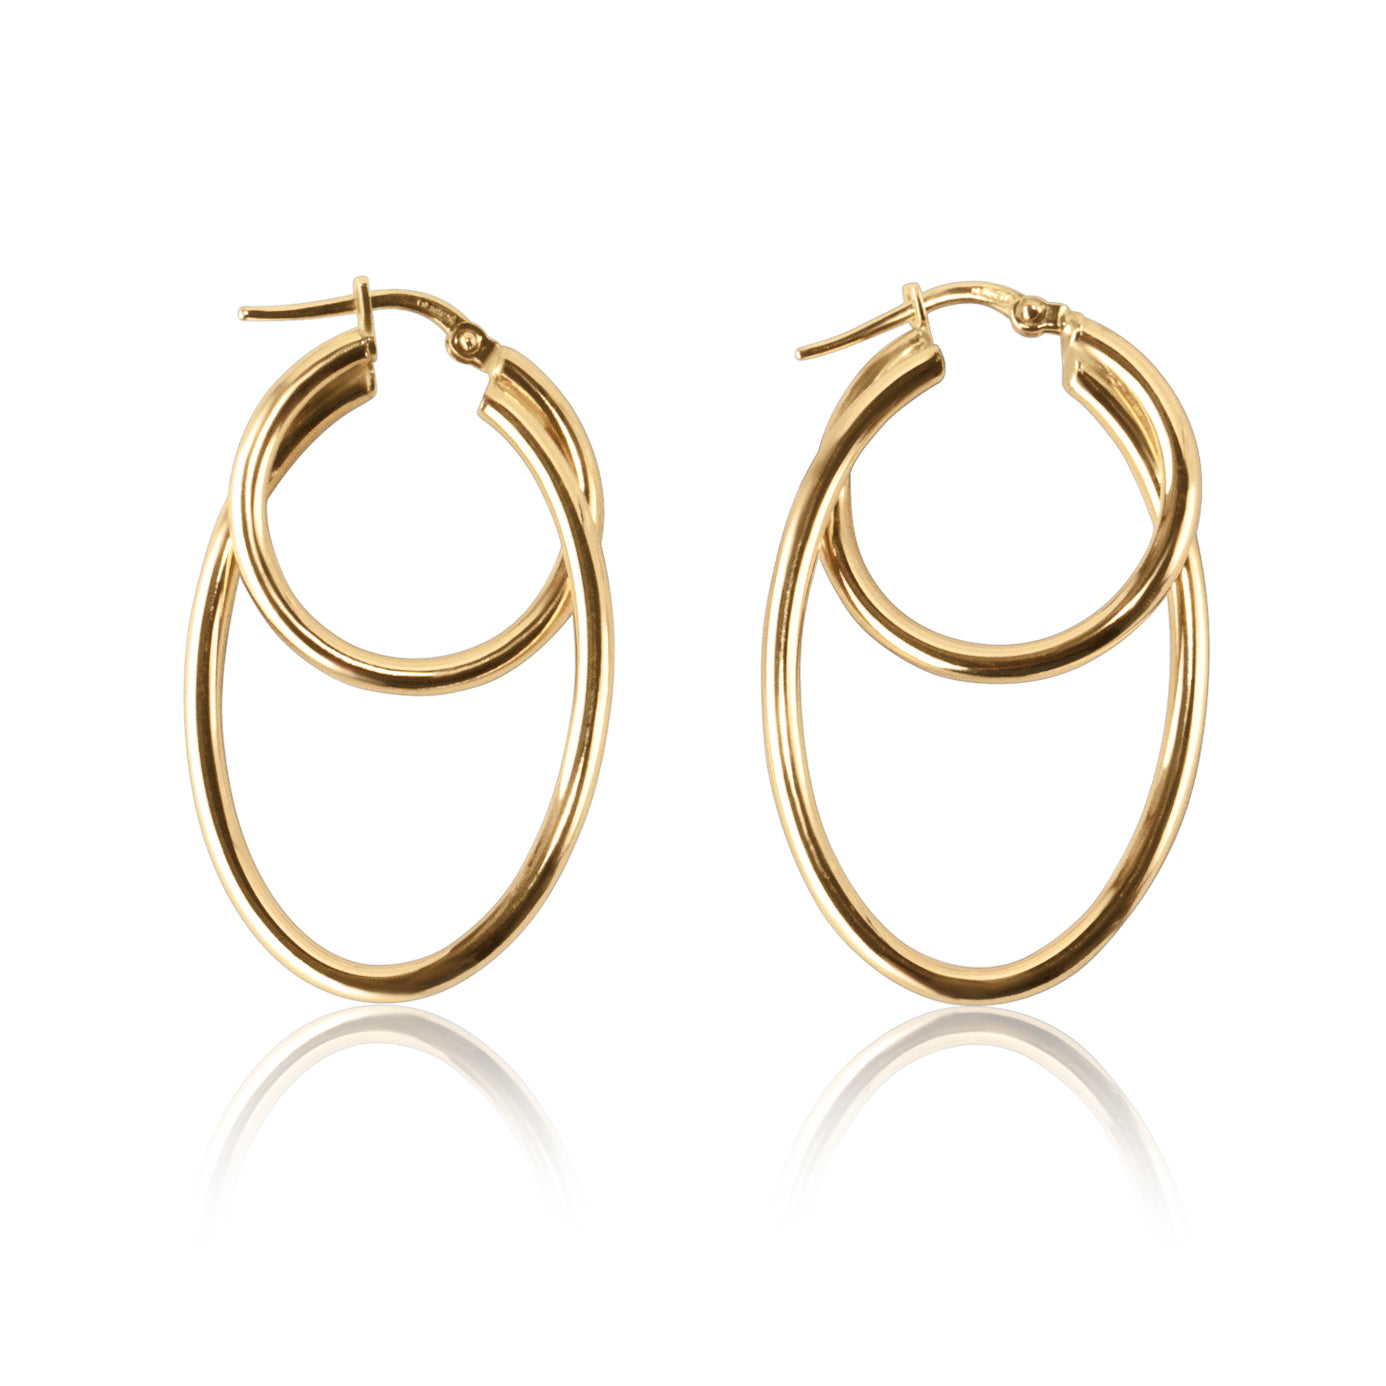 gold doubles hoops earrings face view